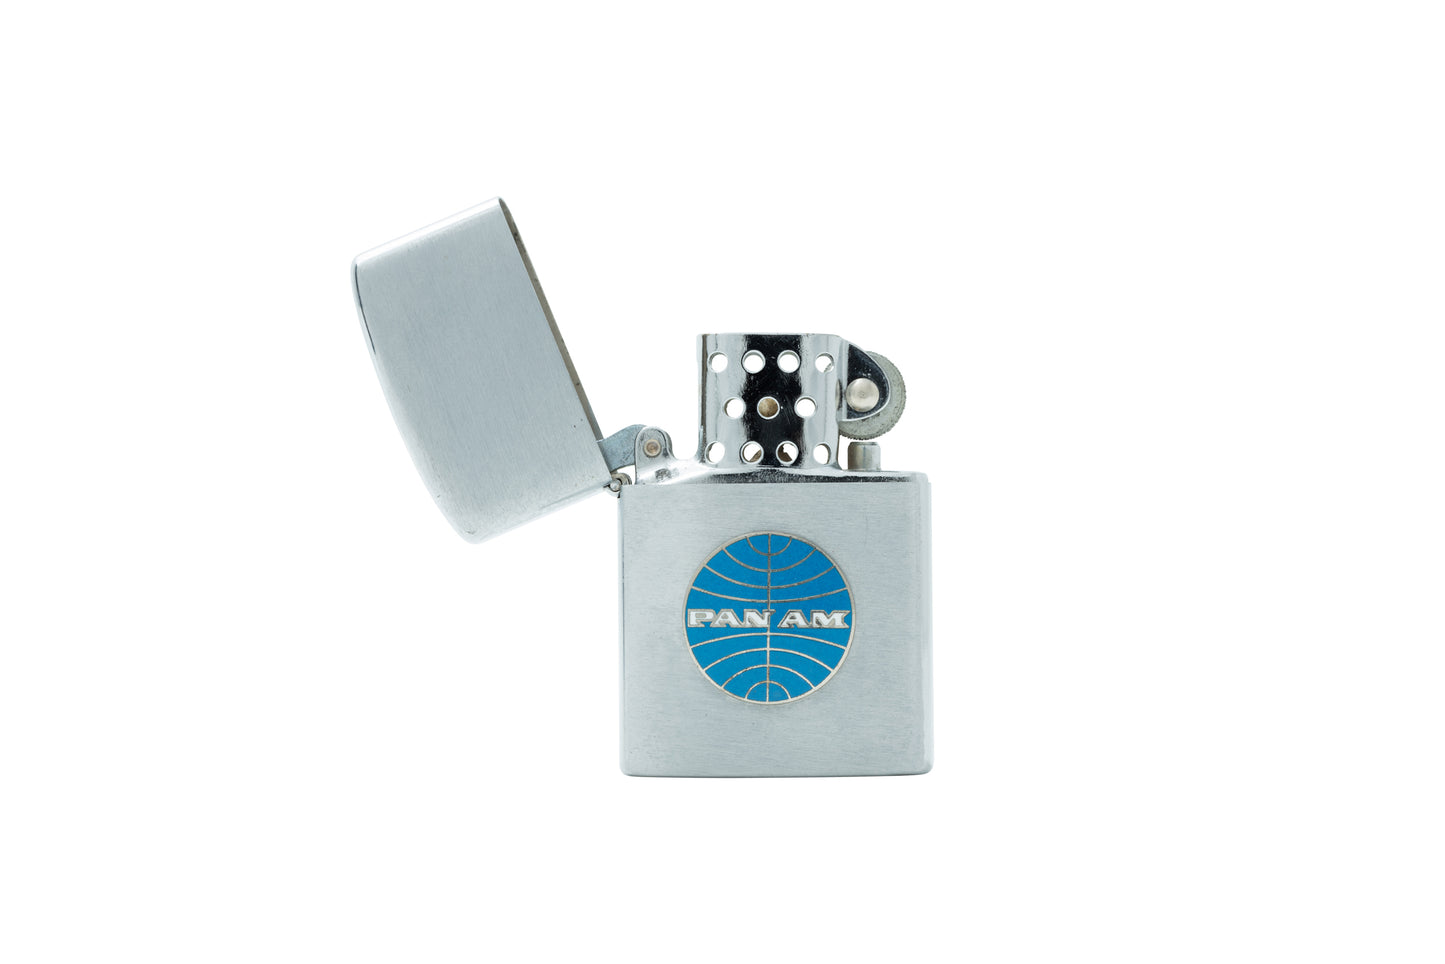 Windproof Lighter for Pan-Am by Penguin 'New Old Stock'